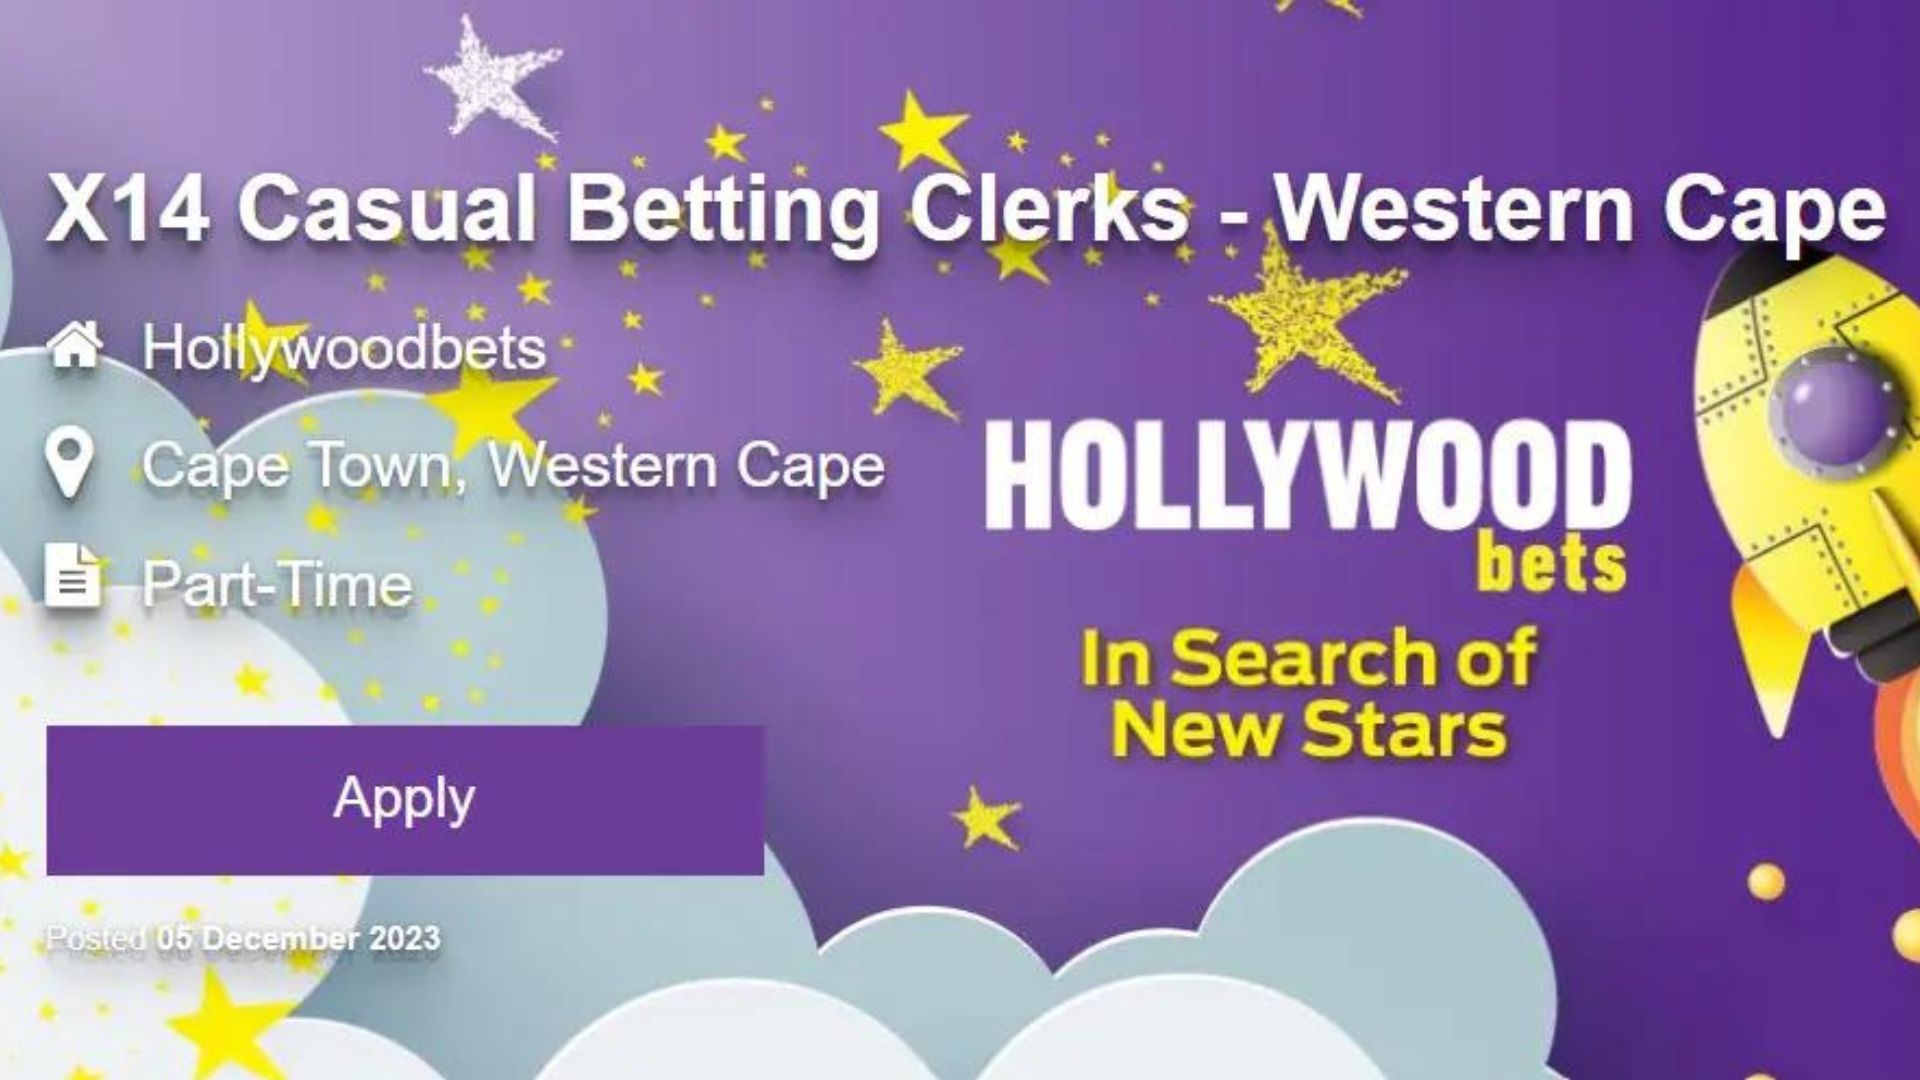 X14 Casual Betting Clerks Wanted at Hollywood Bet